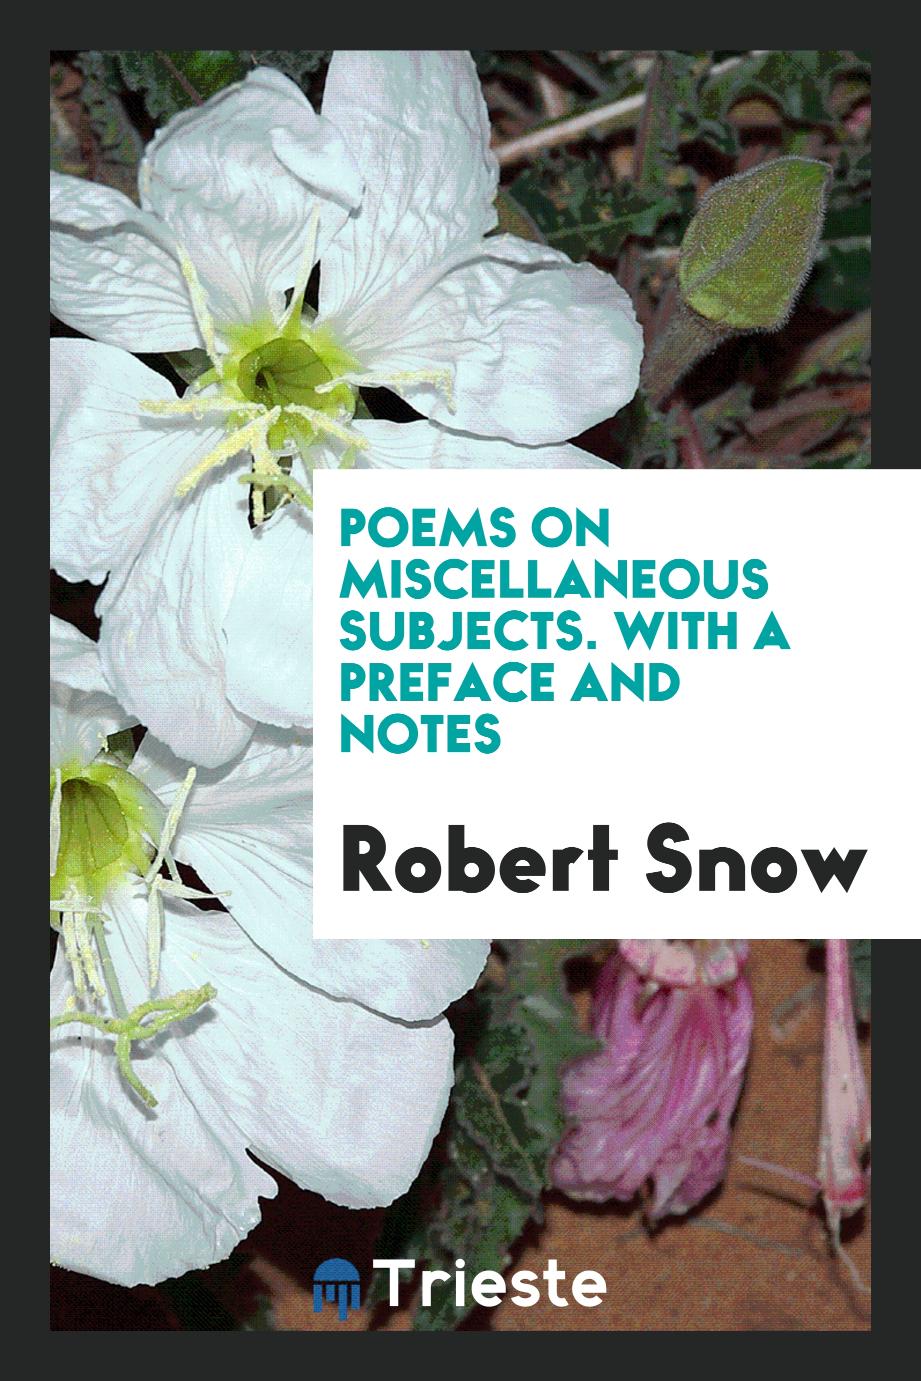 Poems on miscellaneous subjects. With a preface and notes